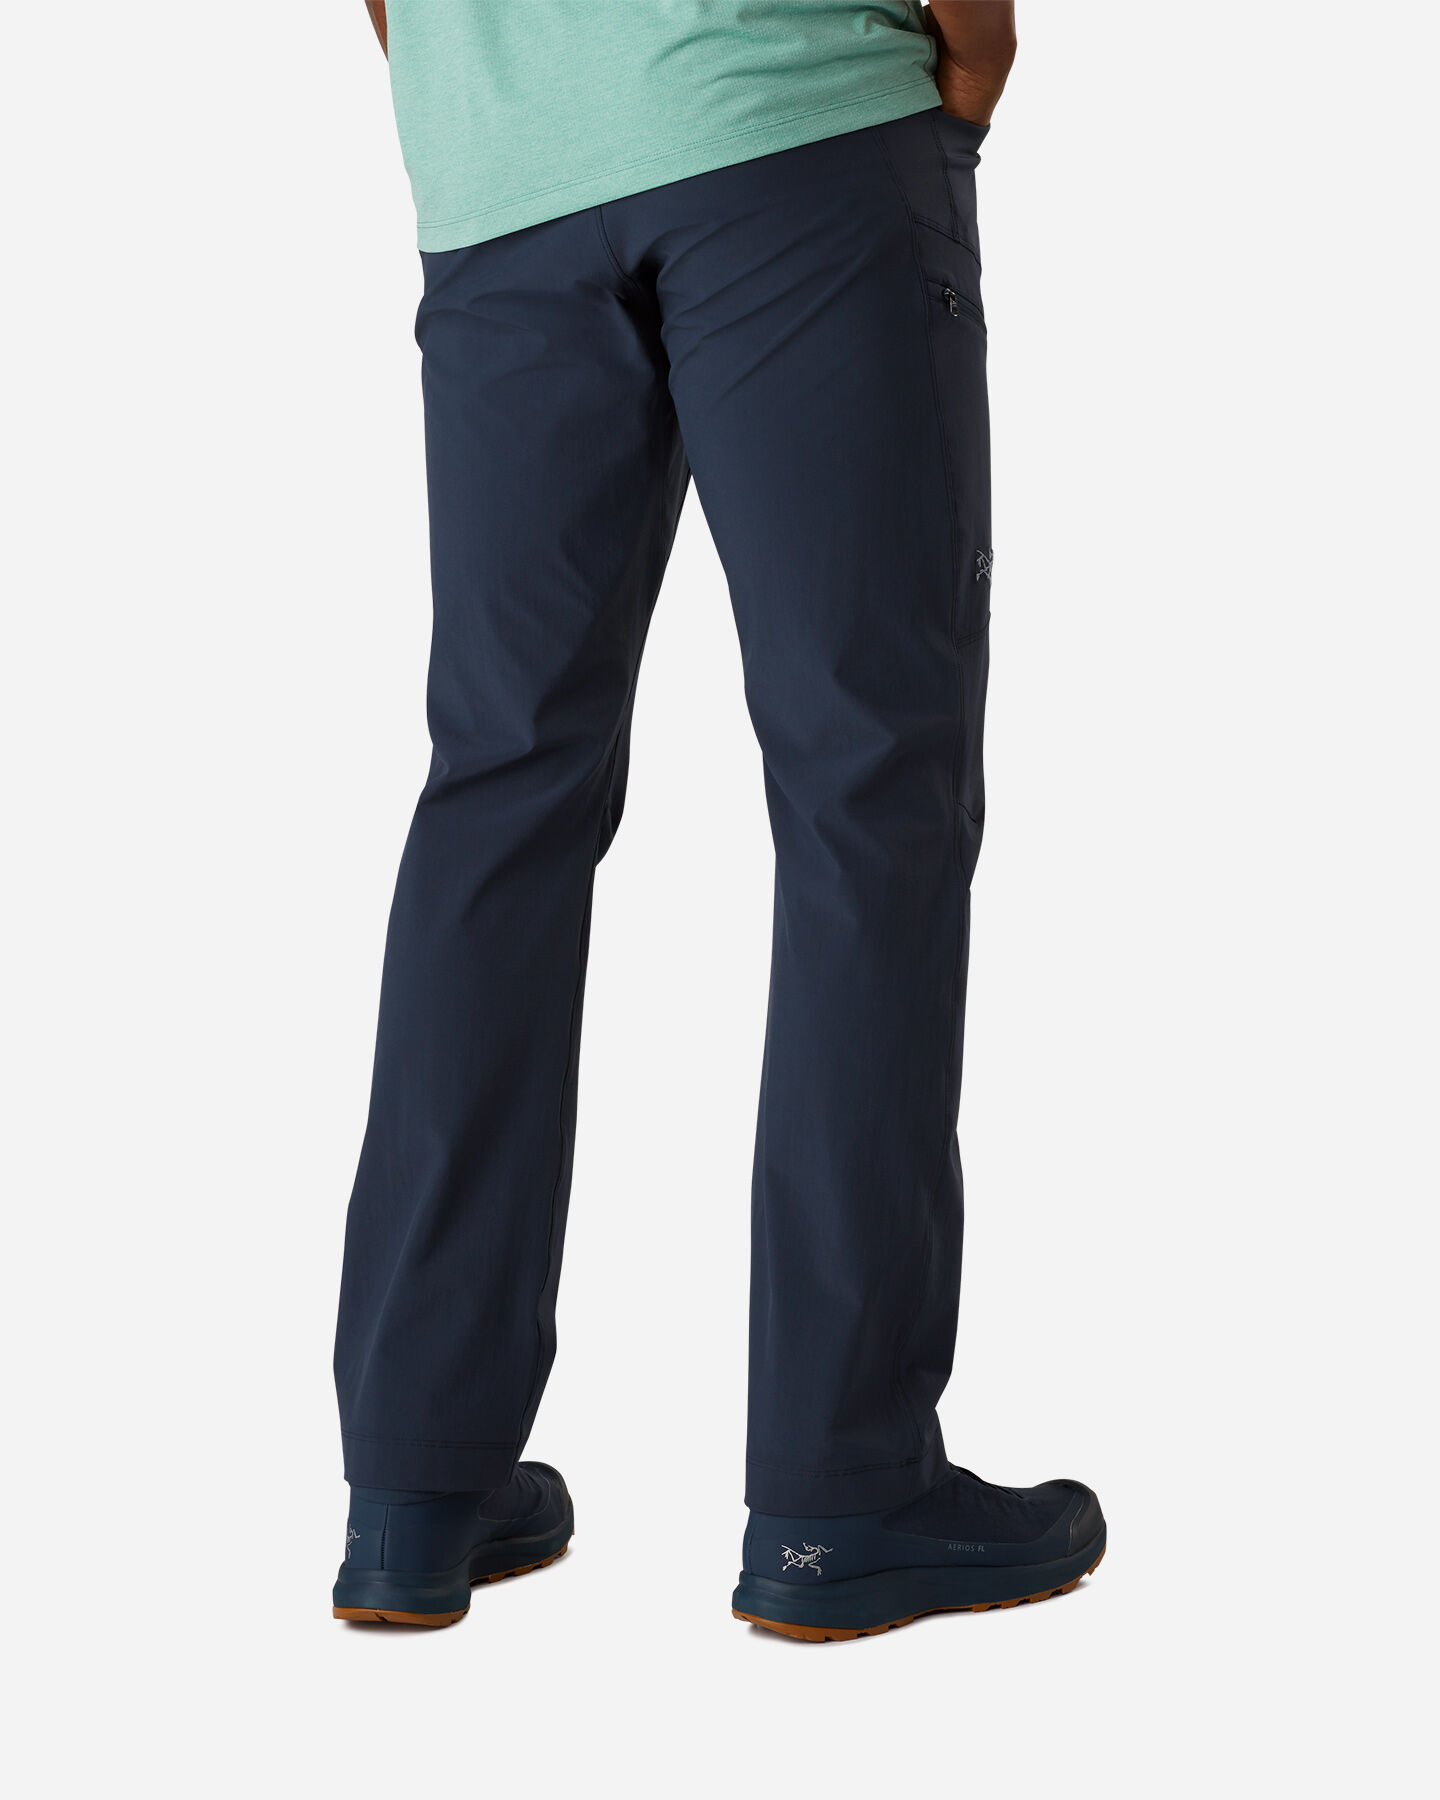  Pantalone outdoor ARC'TERYX LEFROY M S4075199|1|30-32 scatto 2